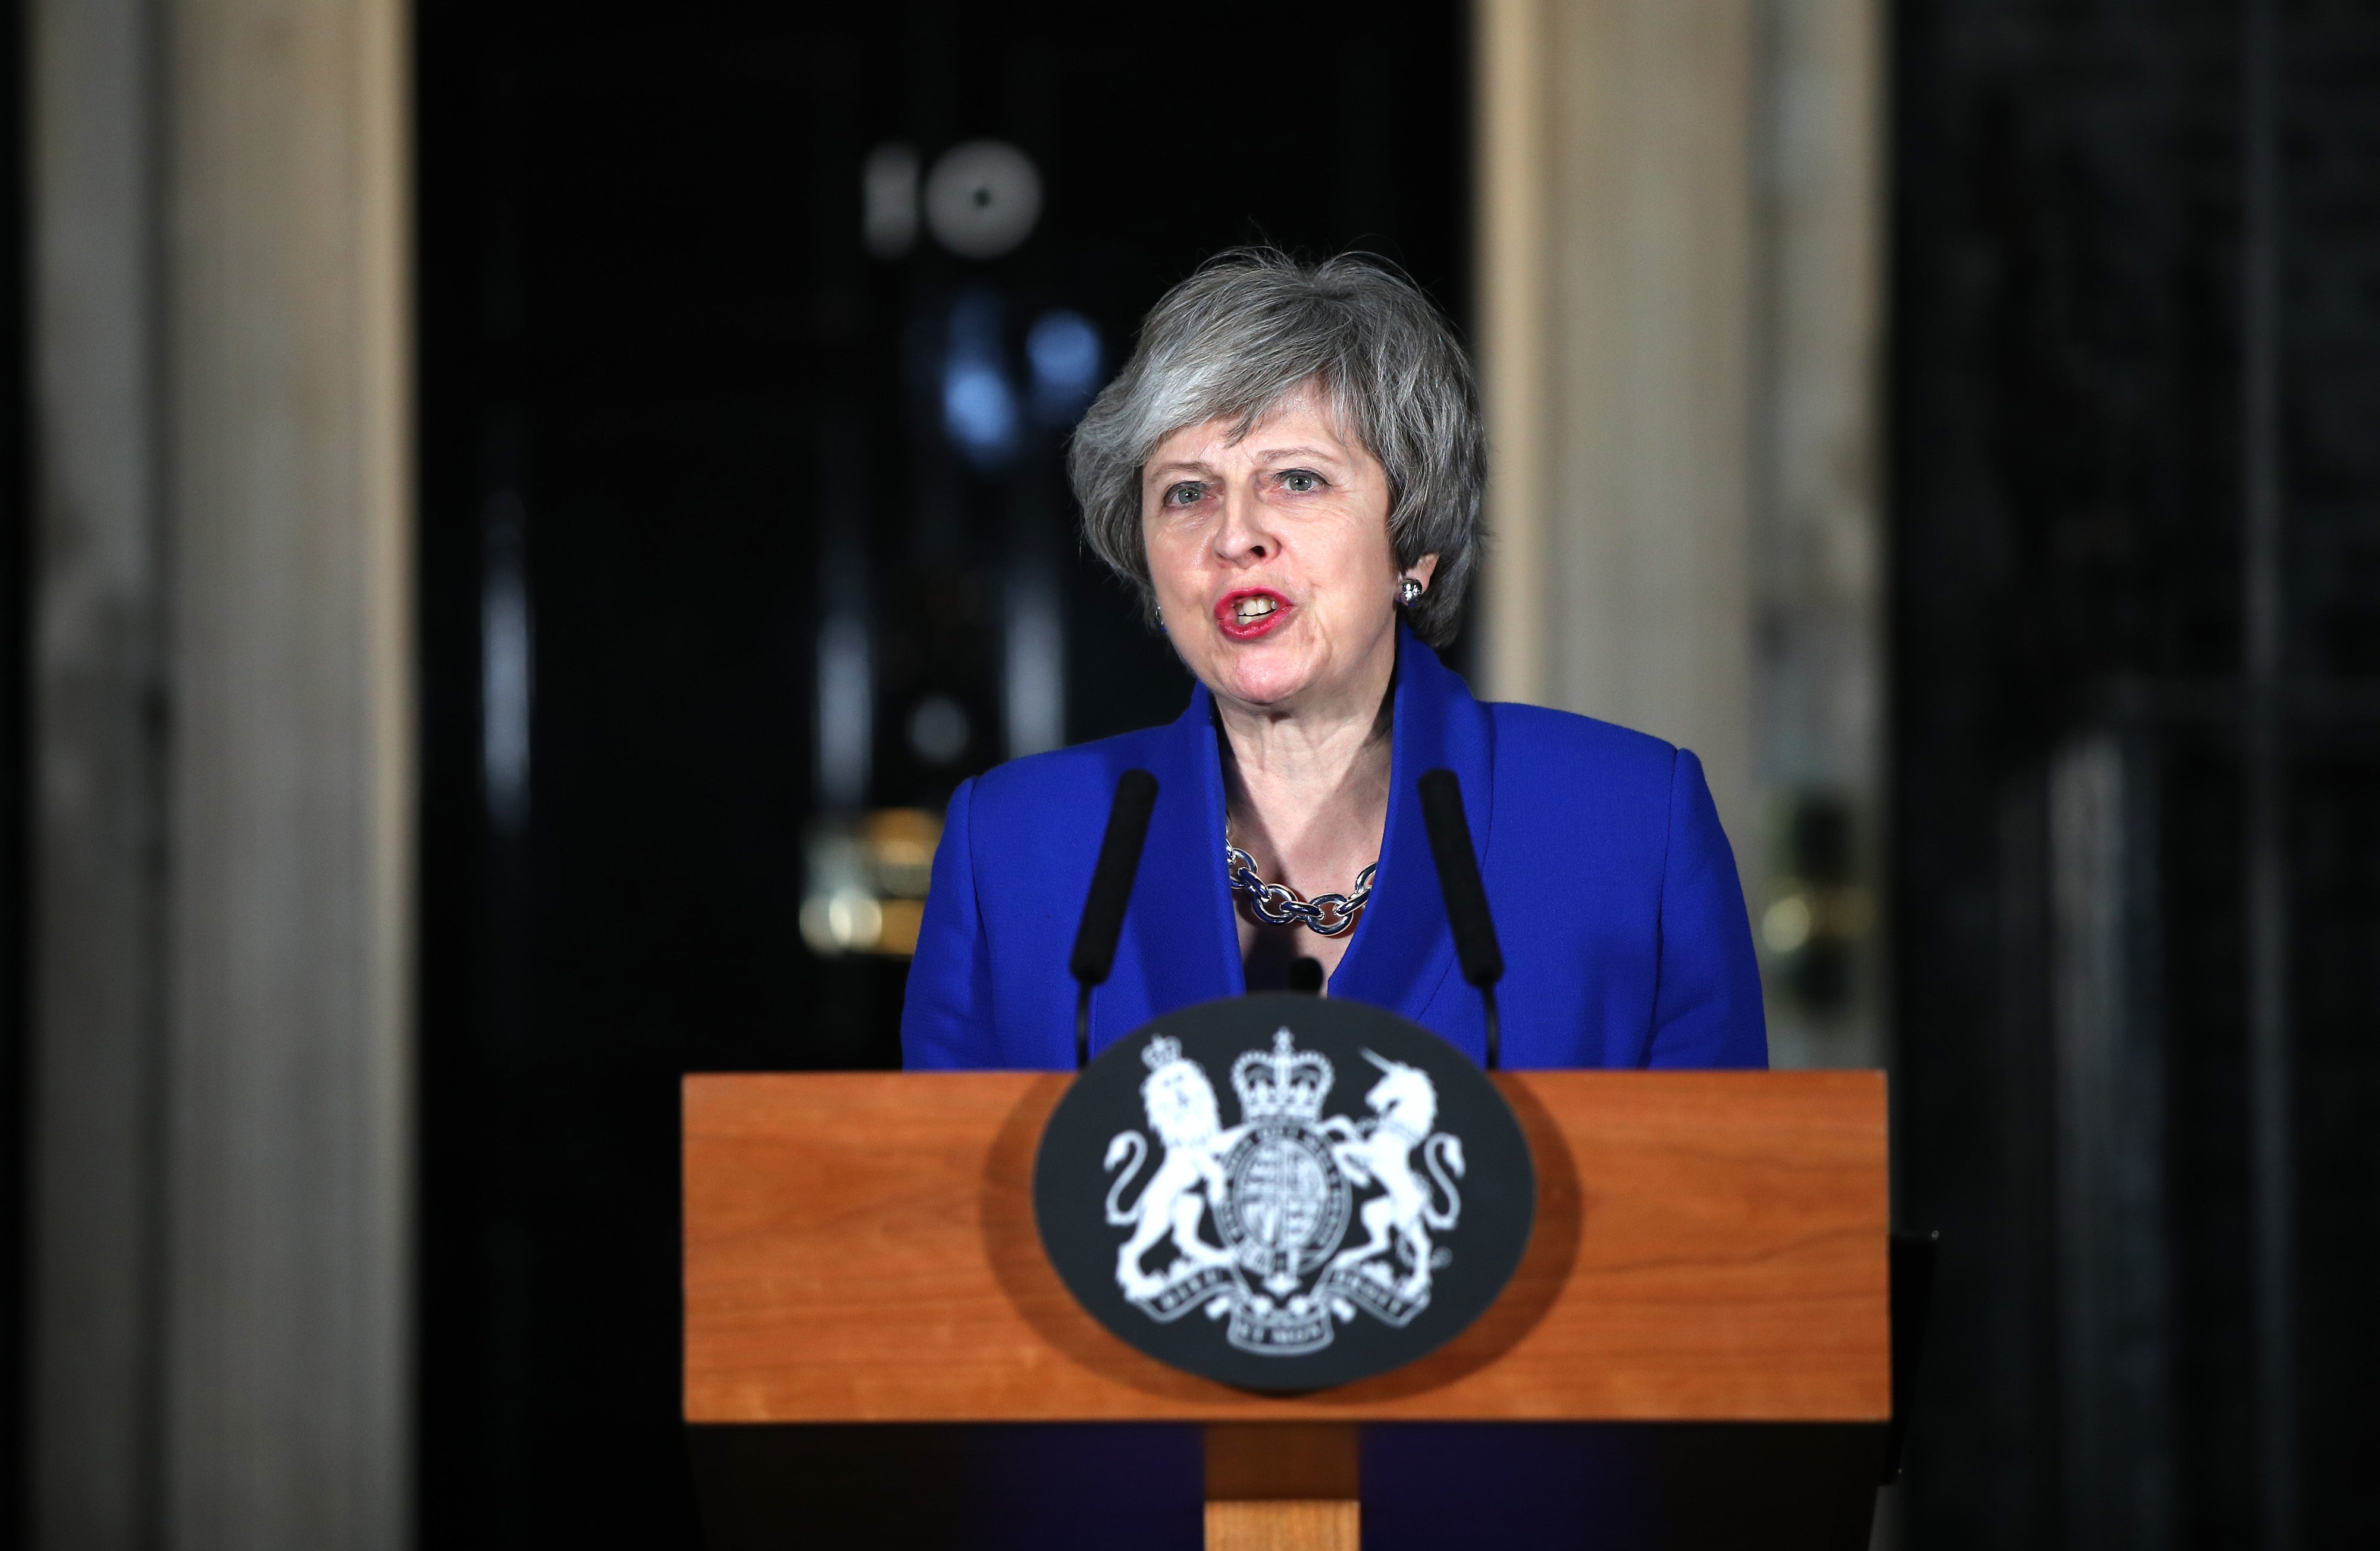 May resigned in 2019 with her premiership dominated by Brexit